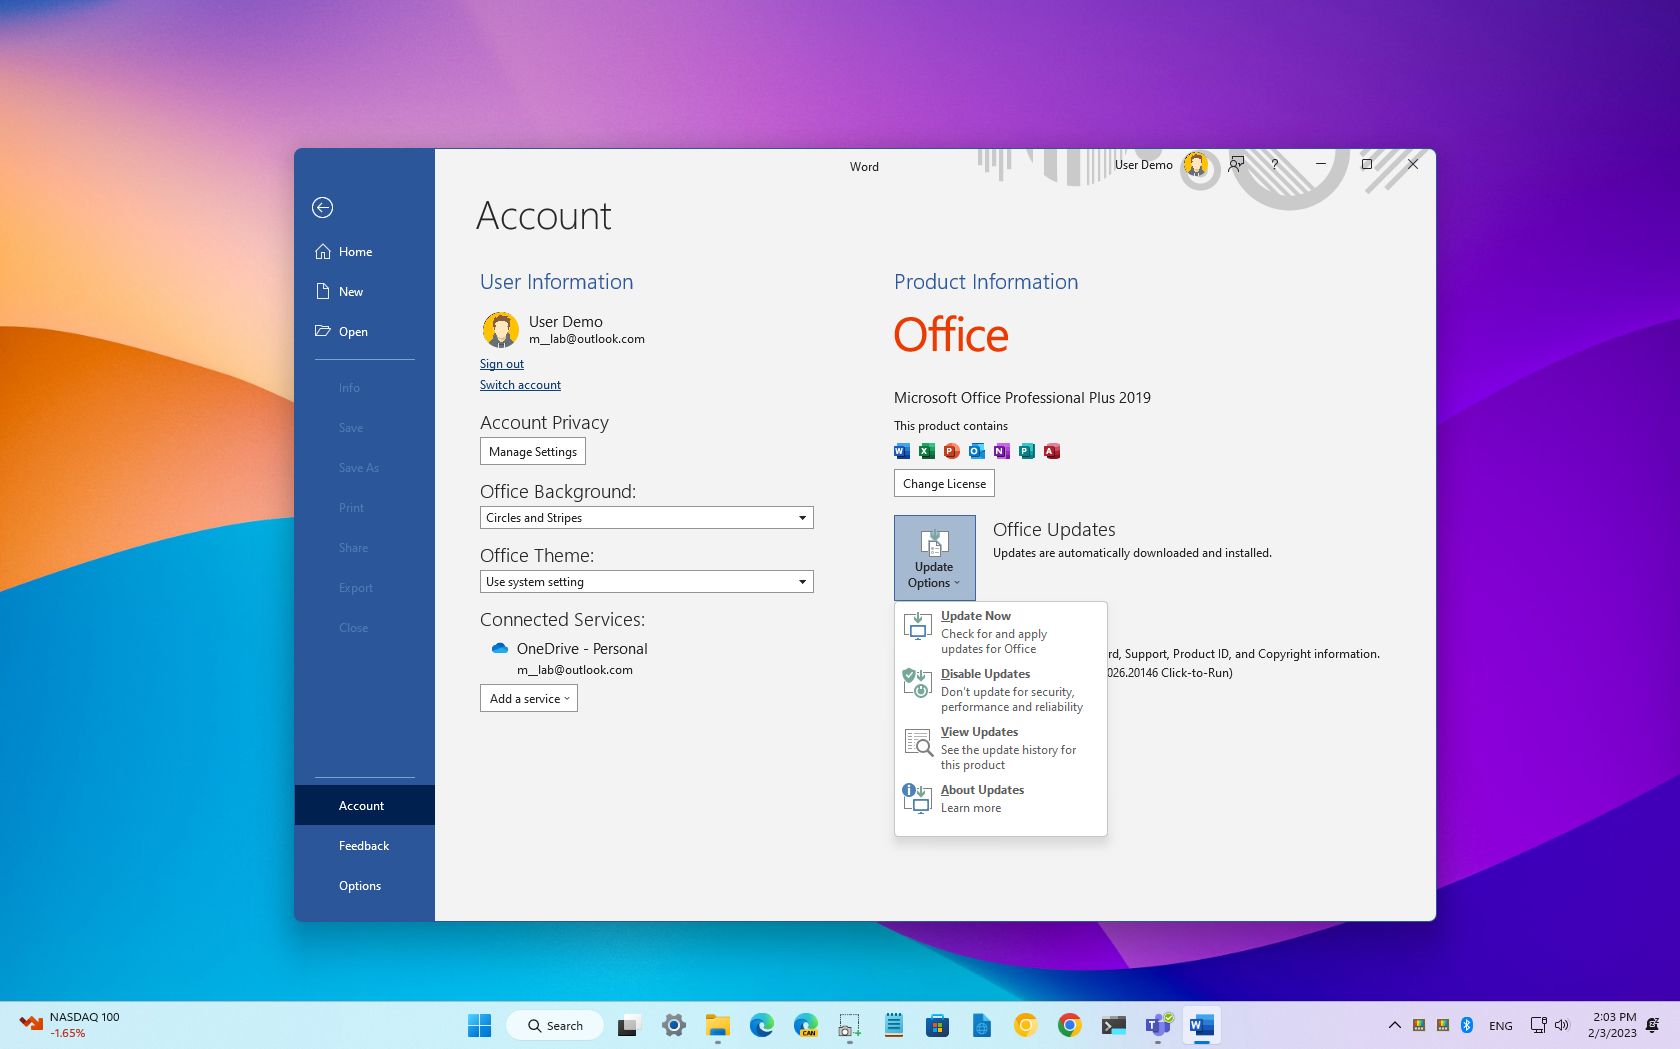 How to disable updates for Microsoft Office apps on Windows 10 and 11